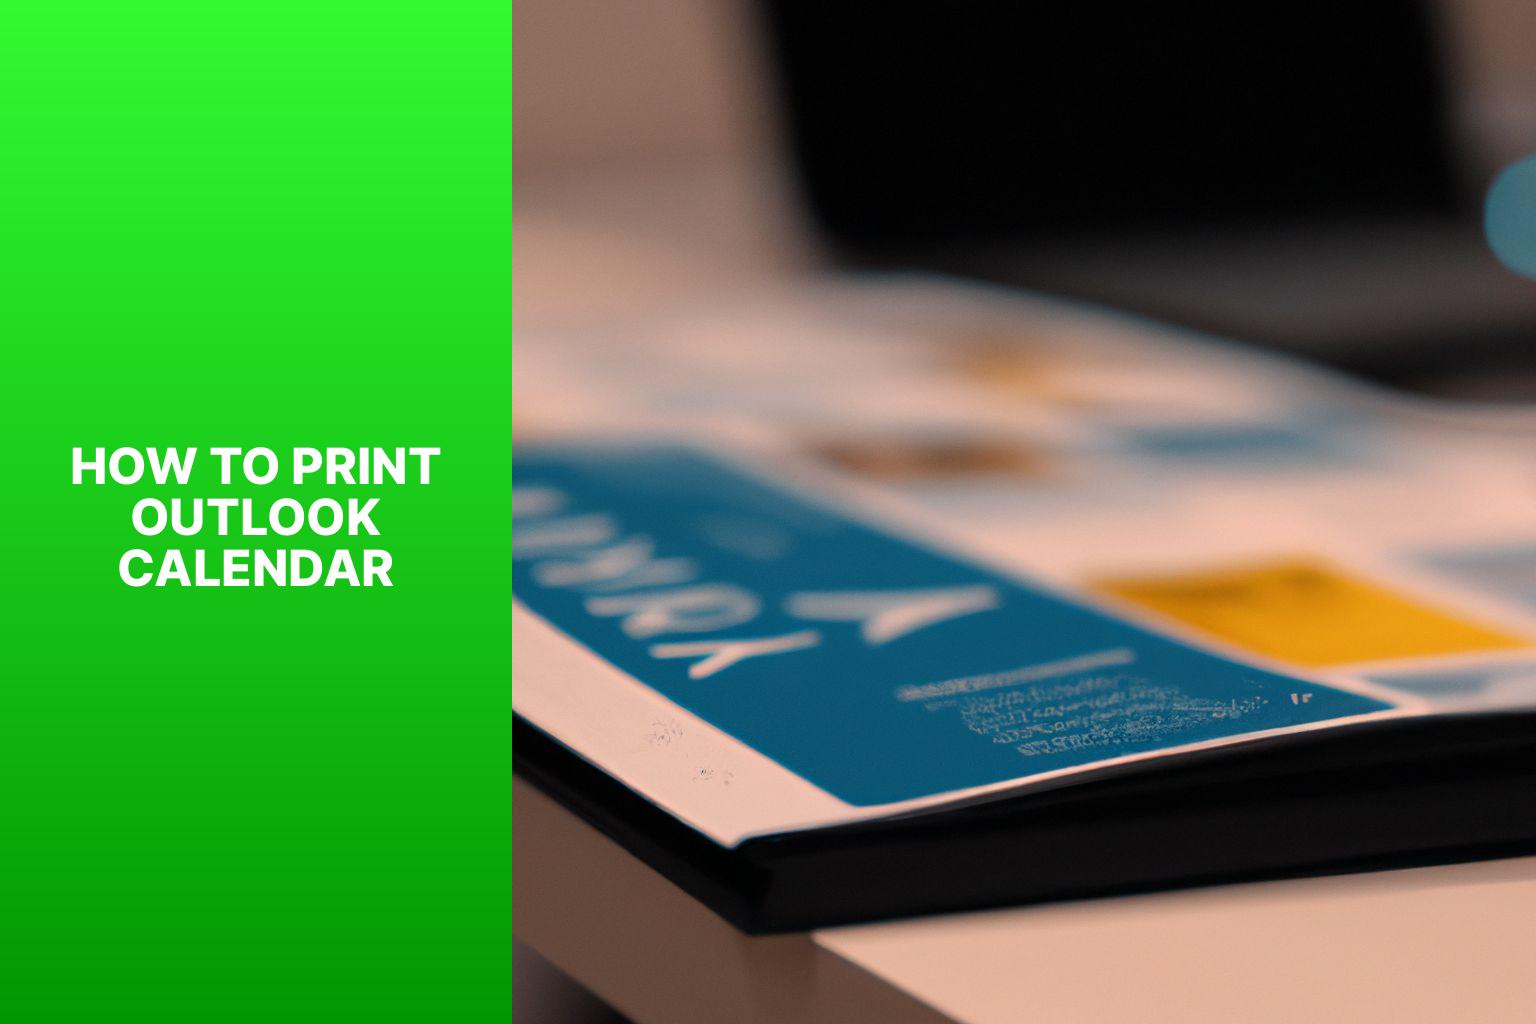 A Complete Guide on How to Print Outlook Calendar for Effective Time Management